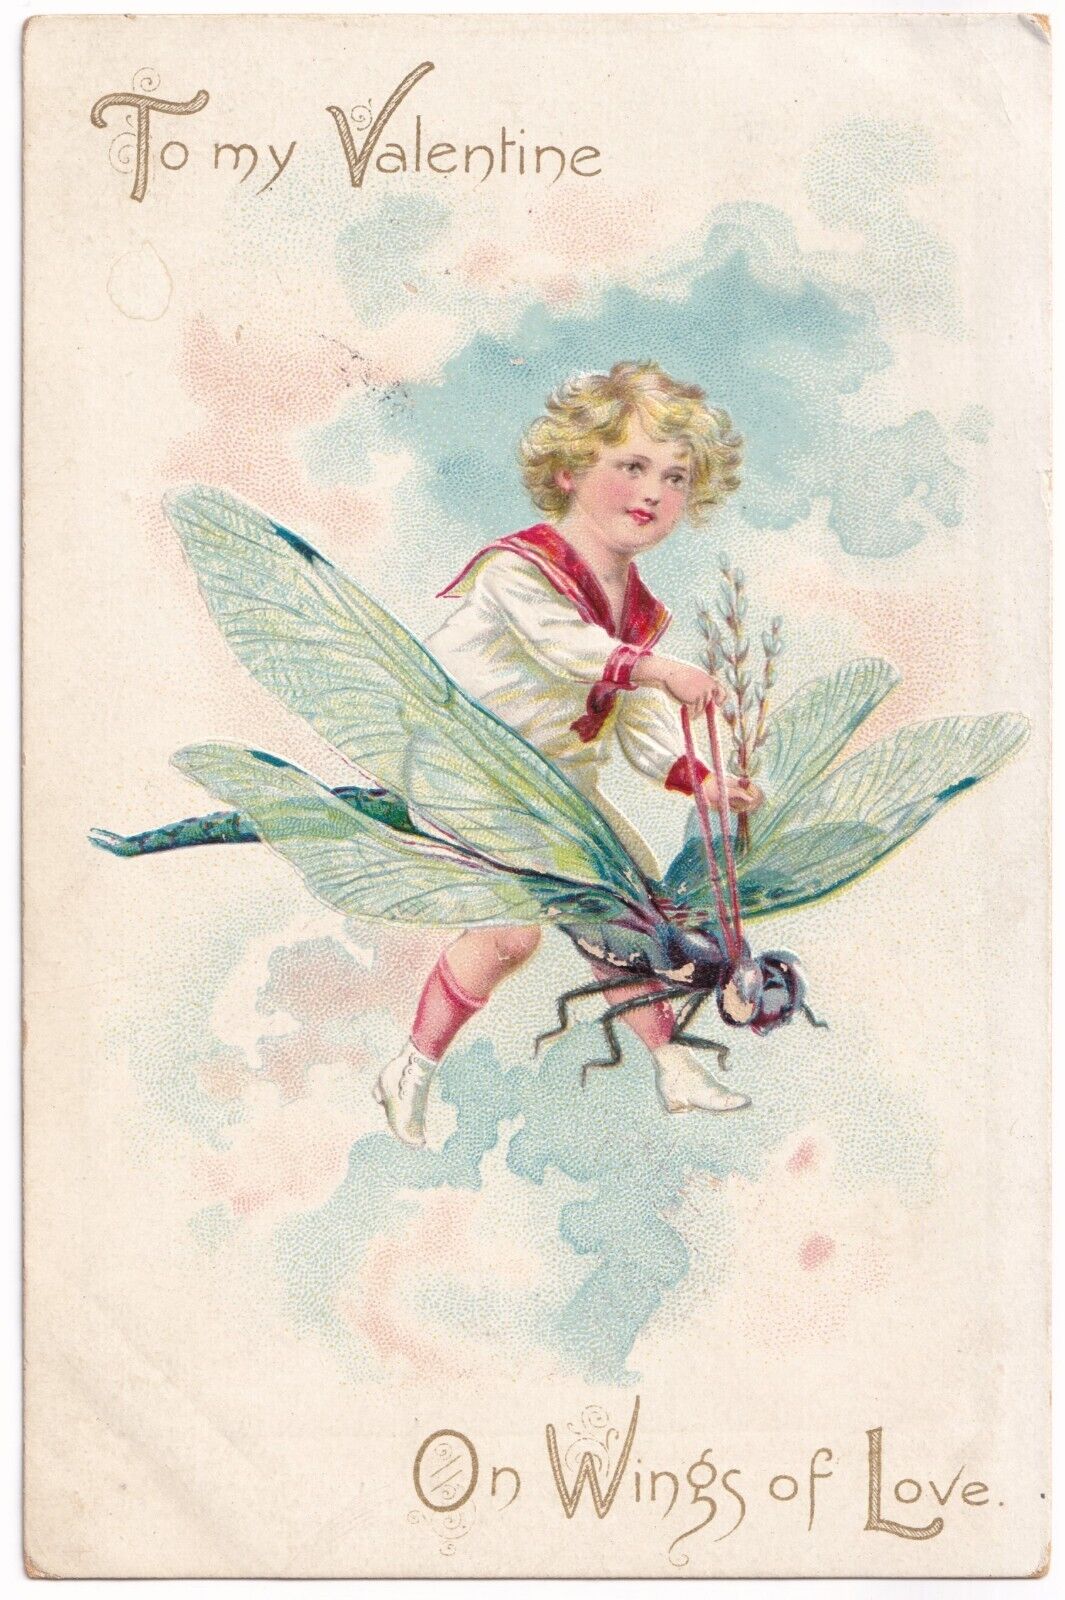 Post Card To My Valentine On Wings of Love posted 1908